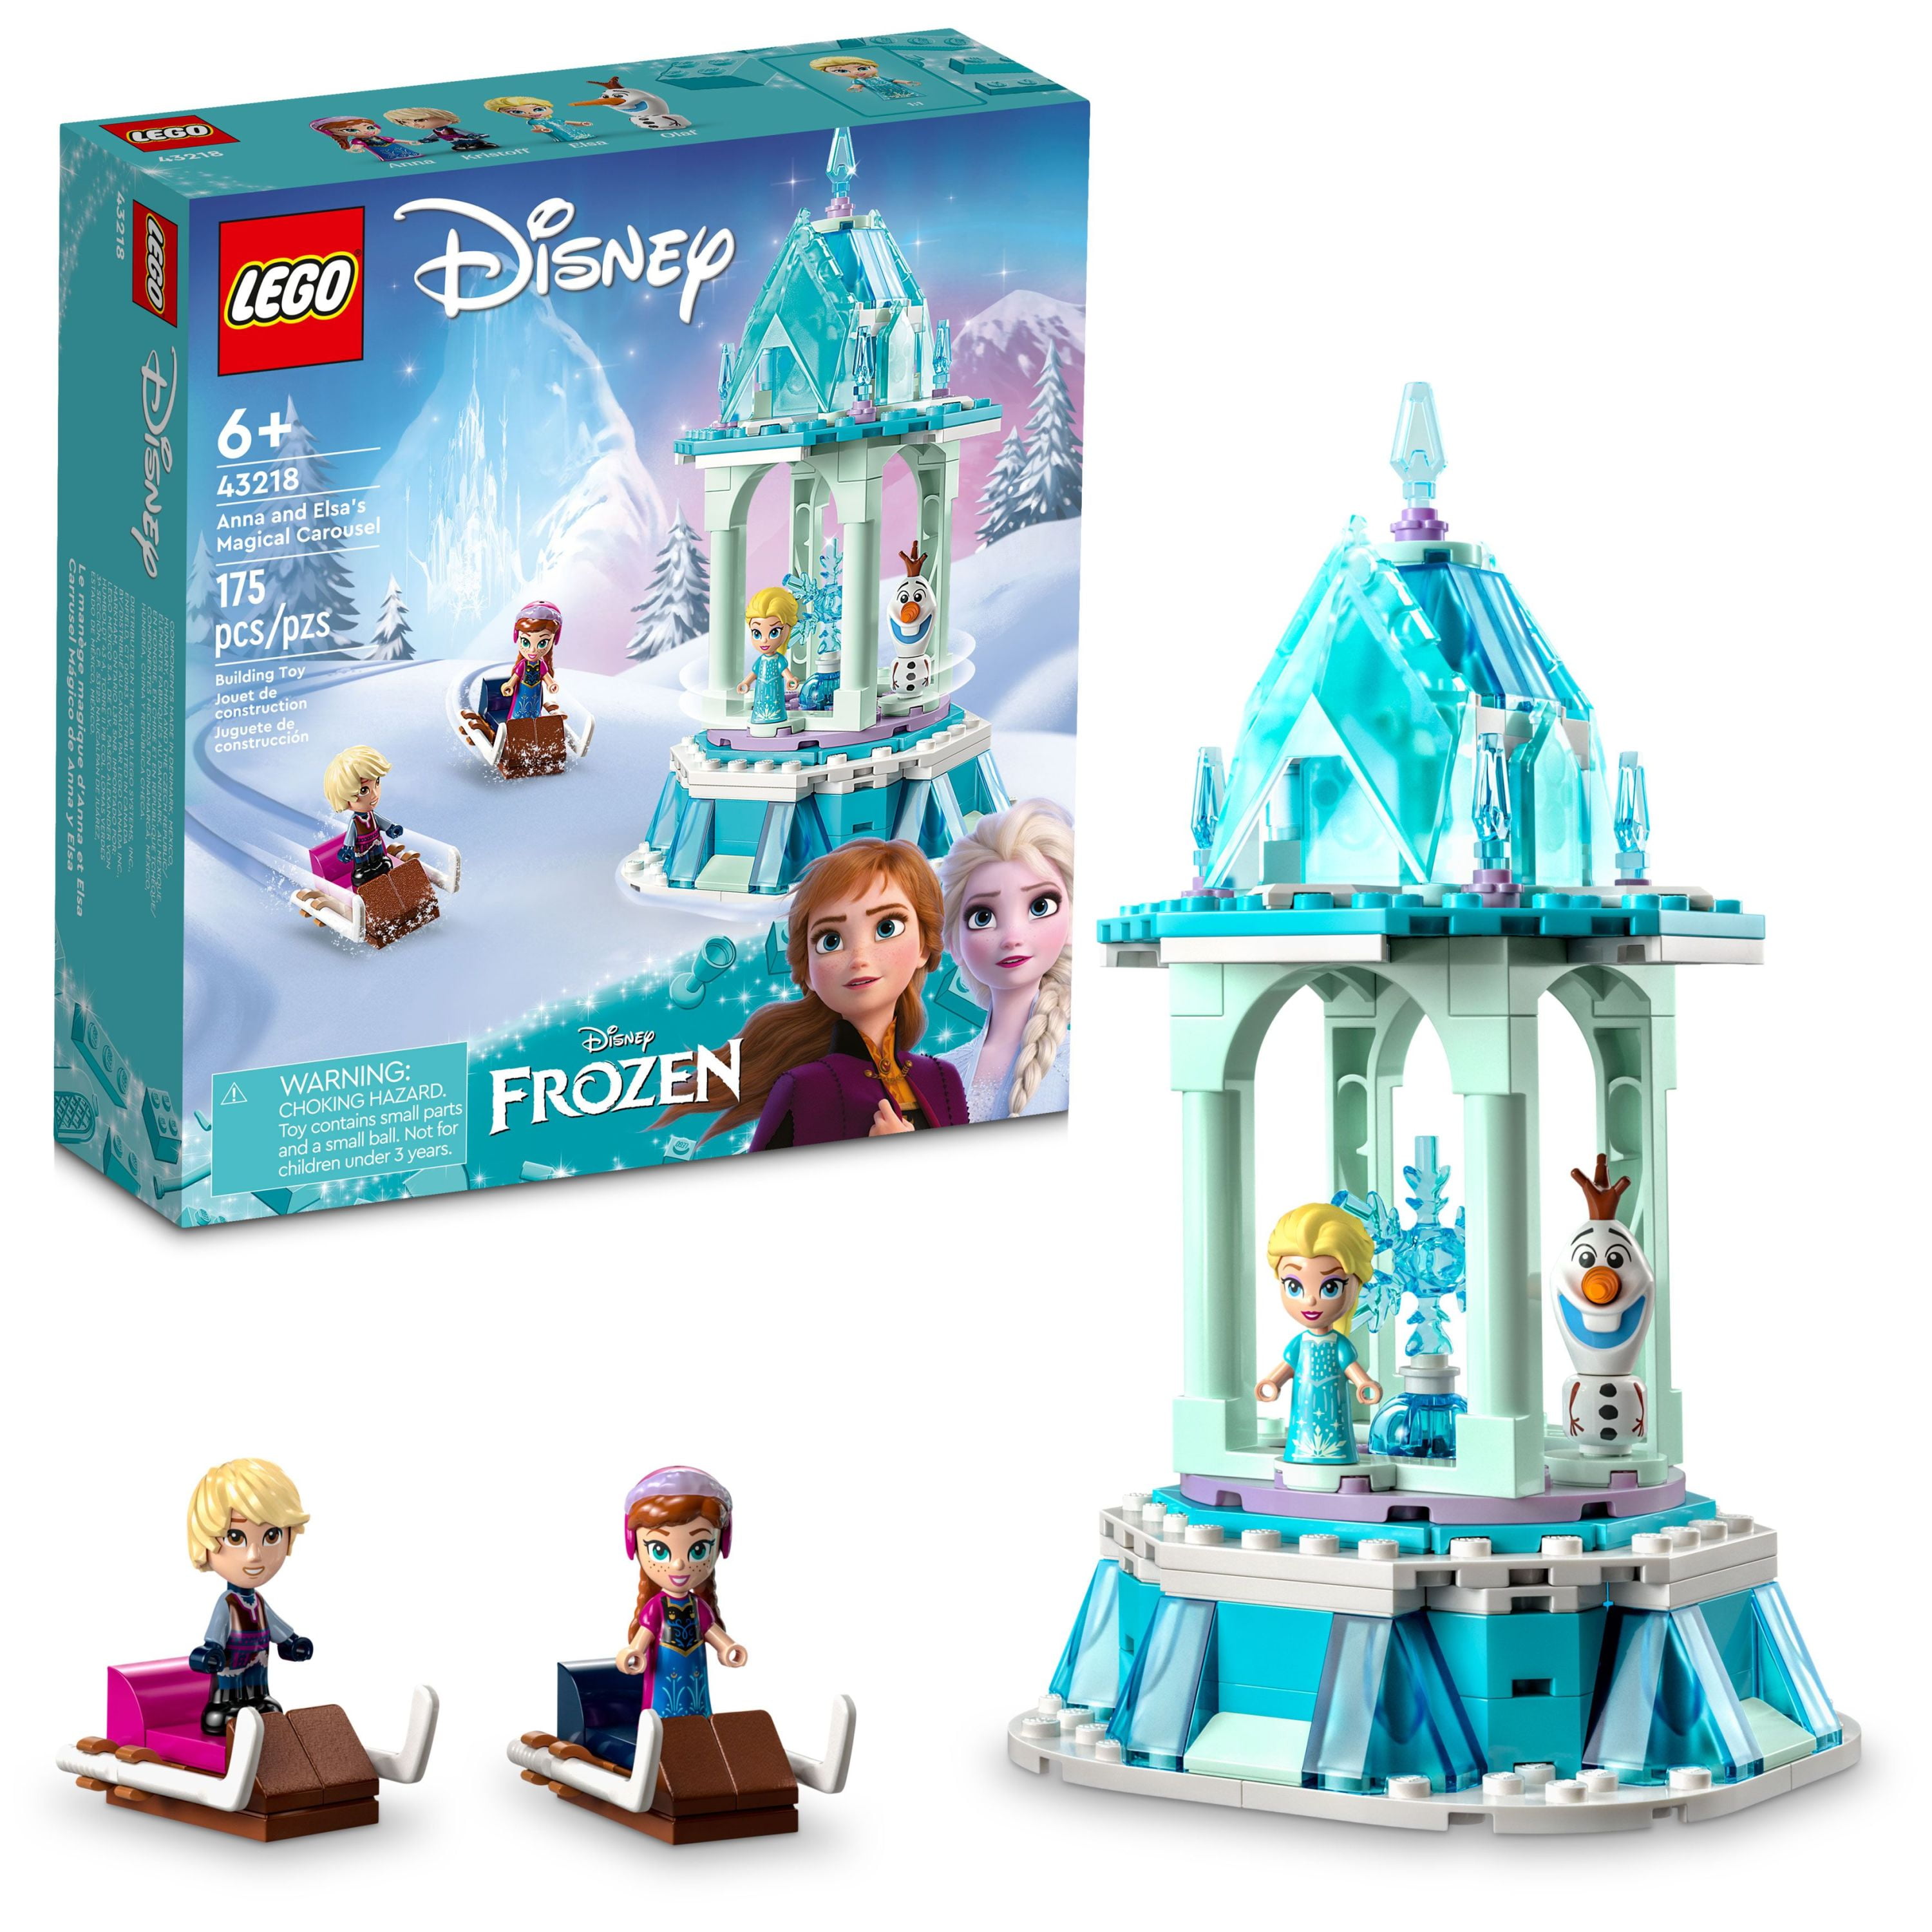 Disney Princess Magical Play Kitchen playset with 11 Pieces for Girls